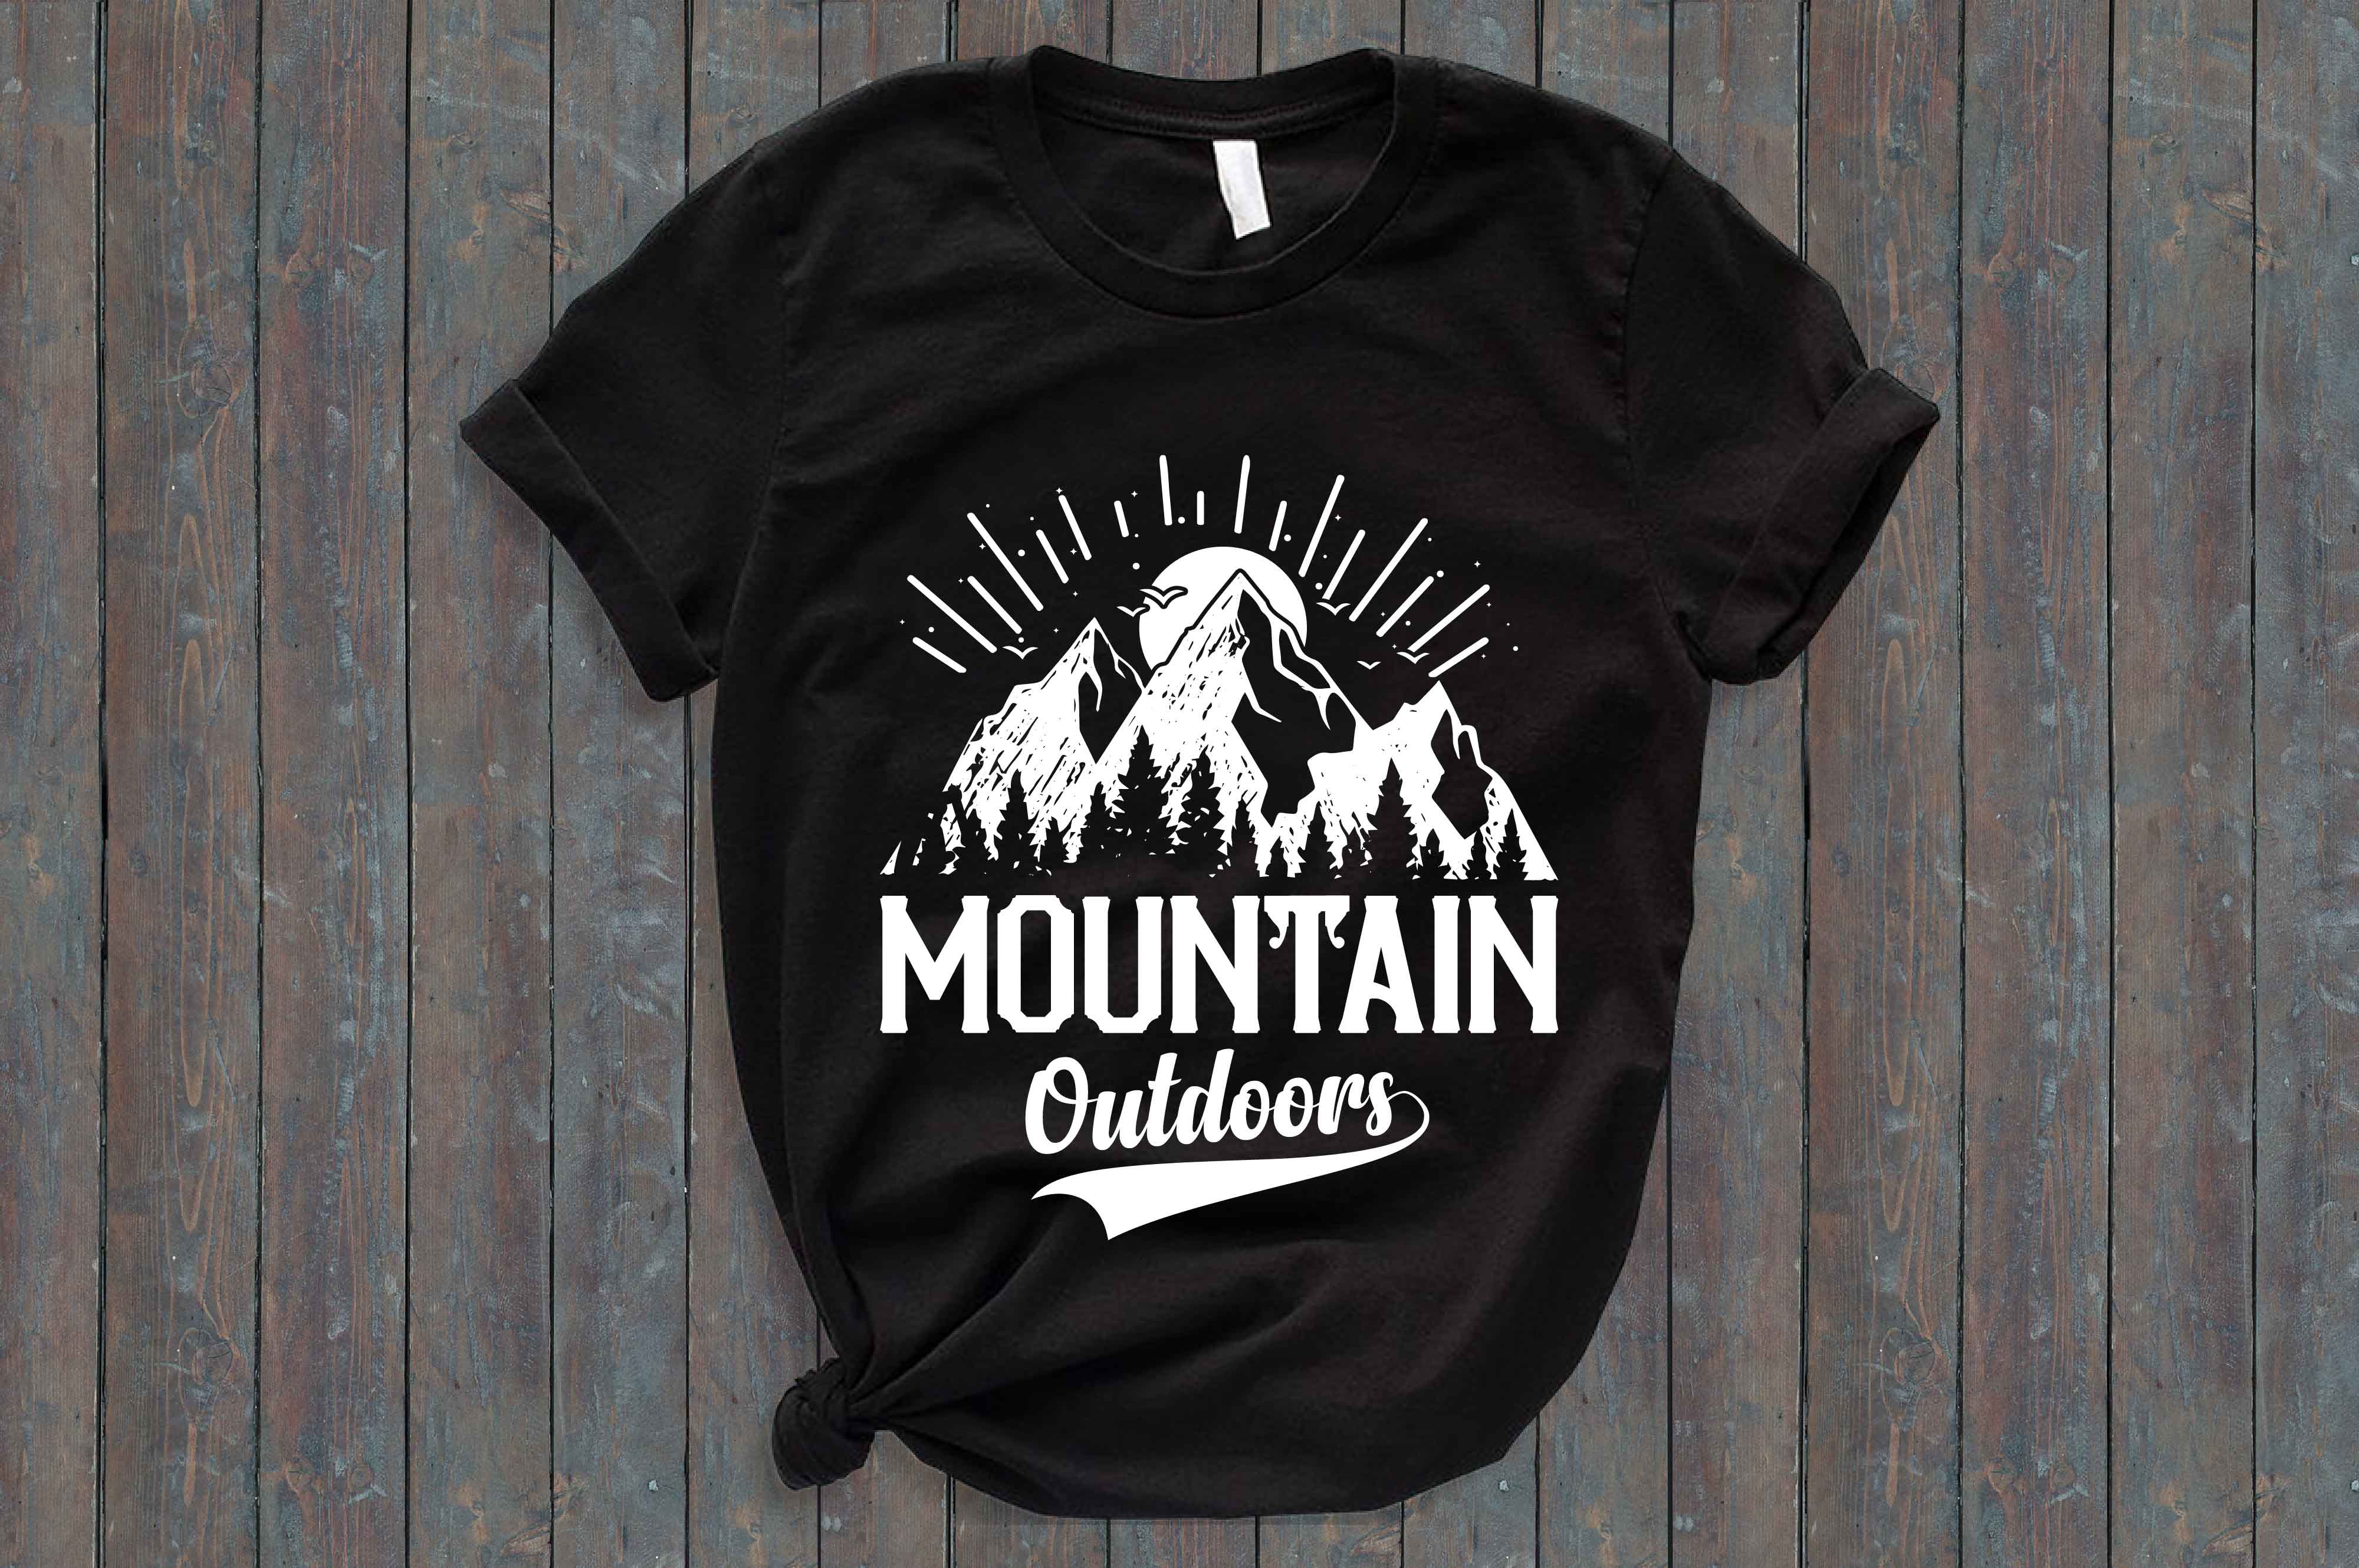 Black shirt that says mountain outdoors on it.